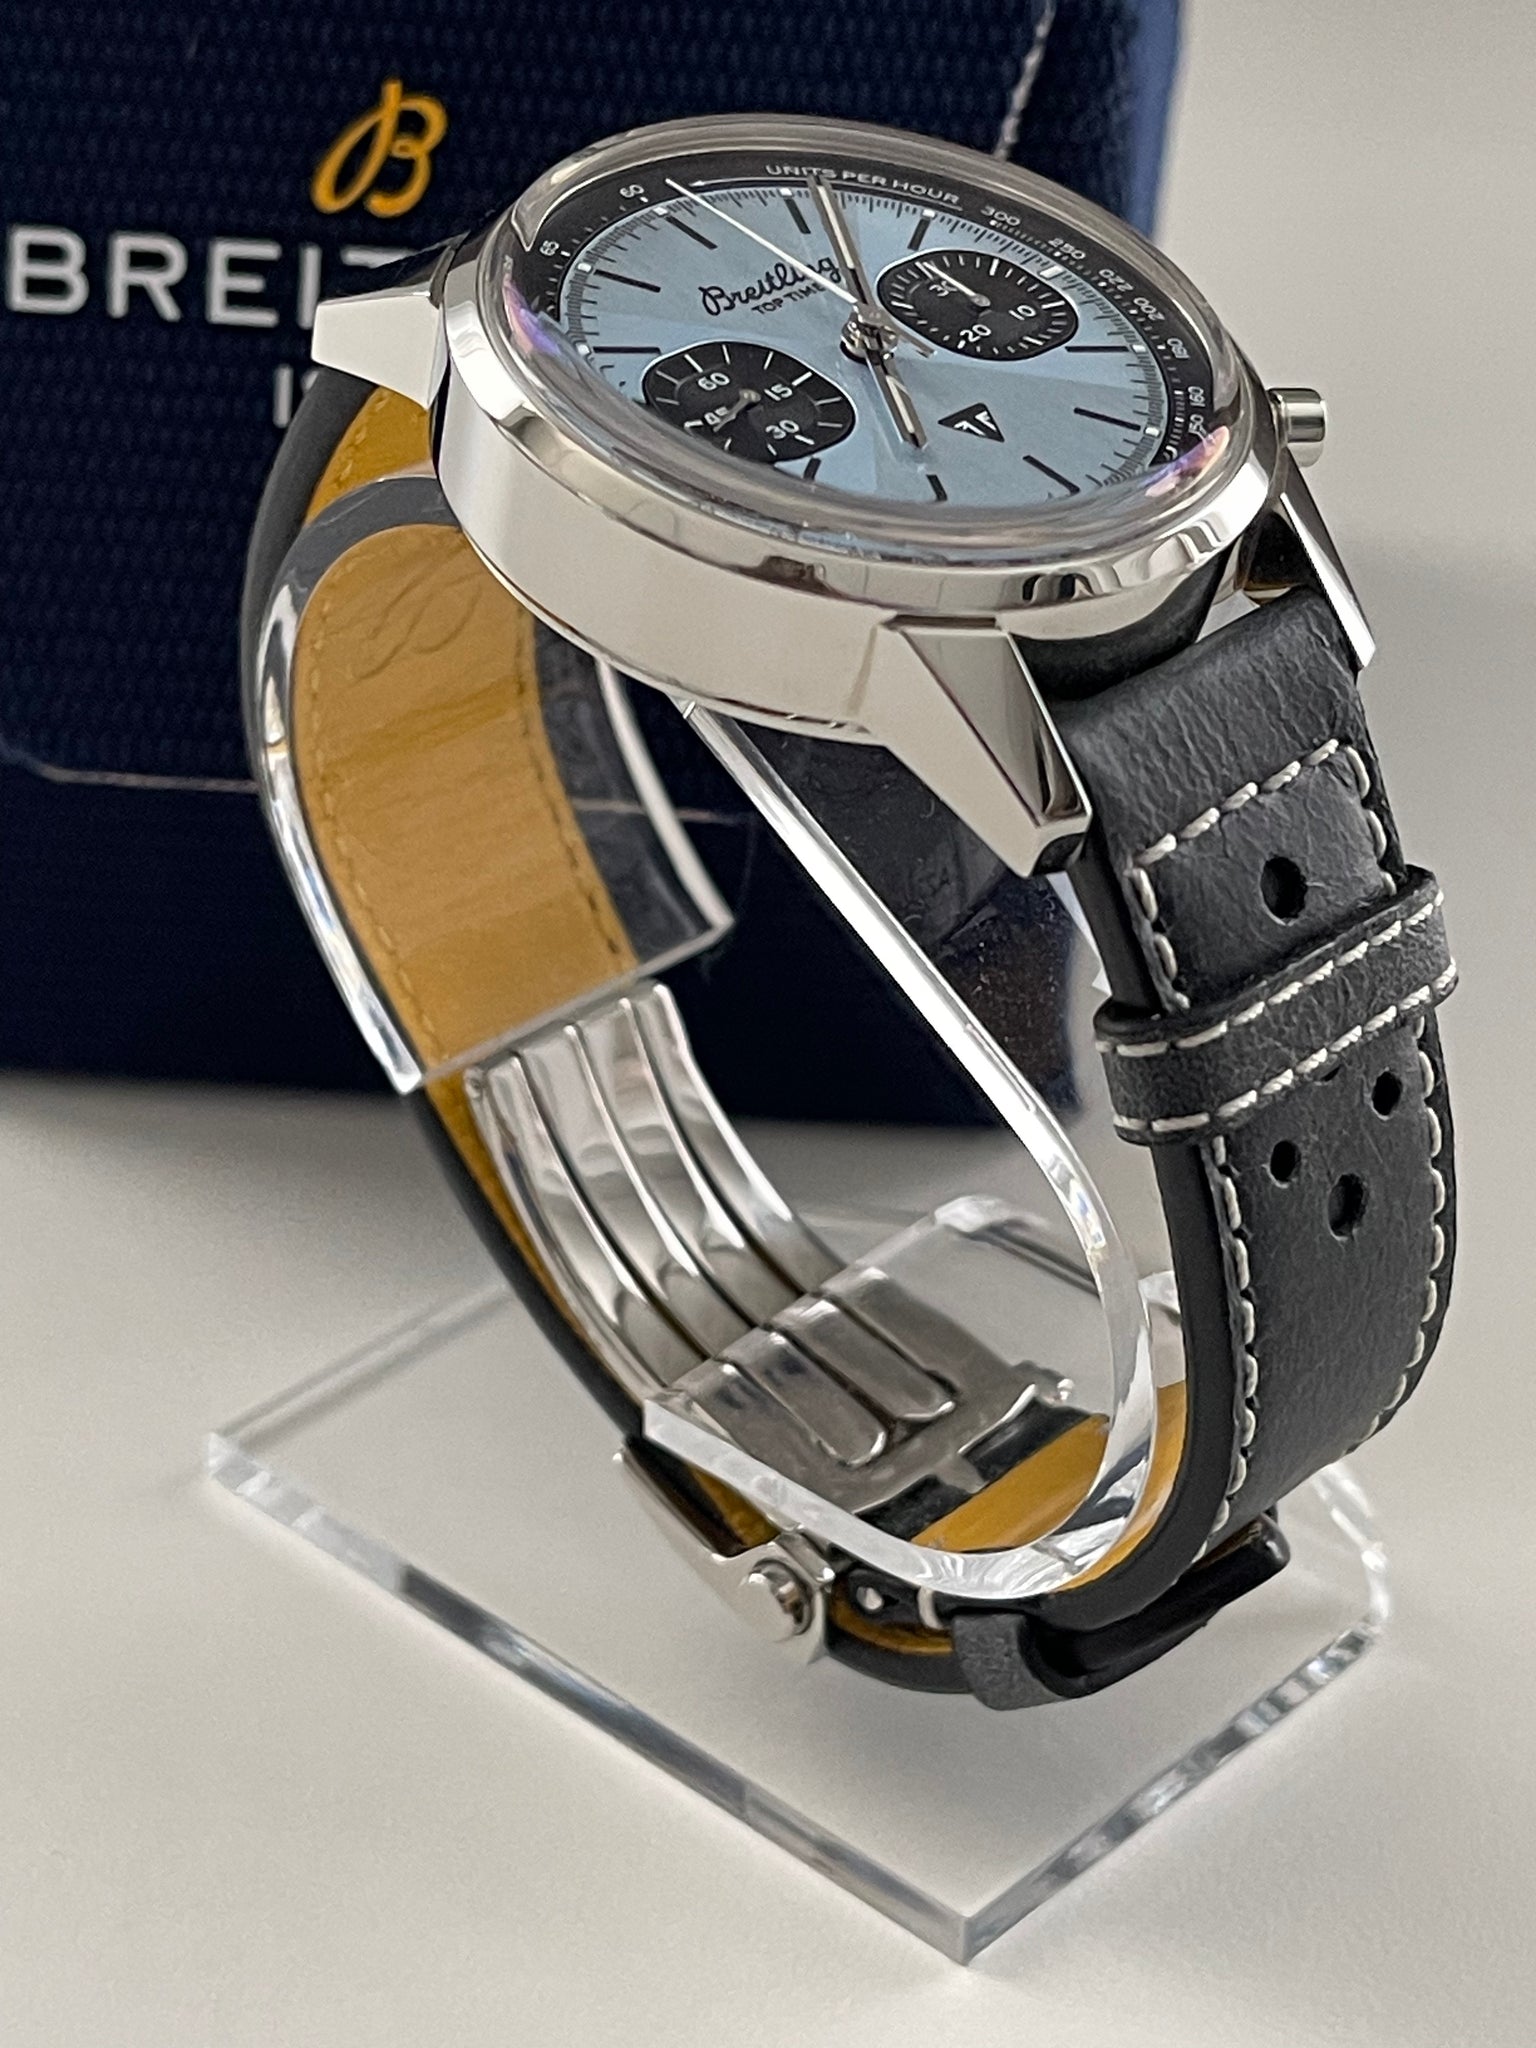 Breitling Top Time Triumph Men's Chronograph – Every Watch Has a Story